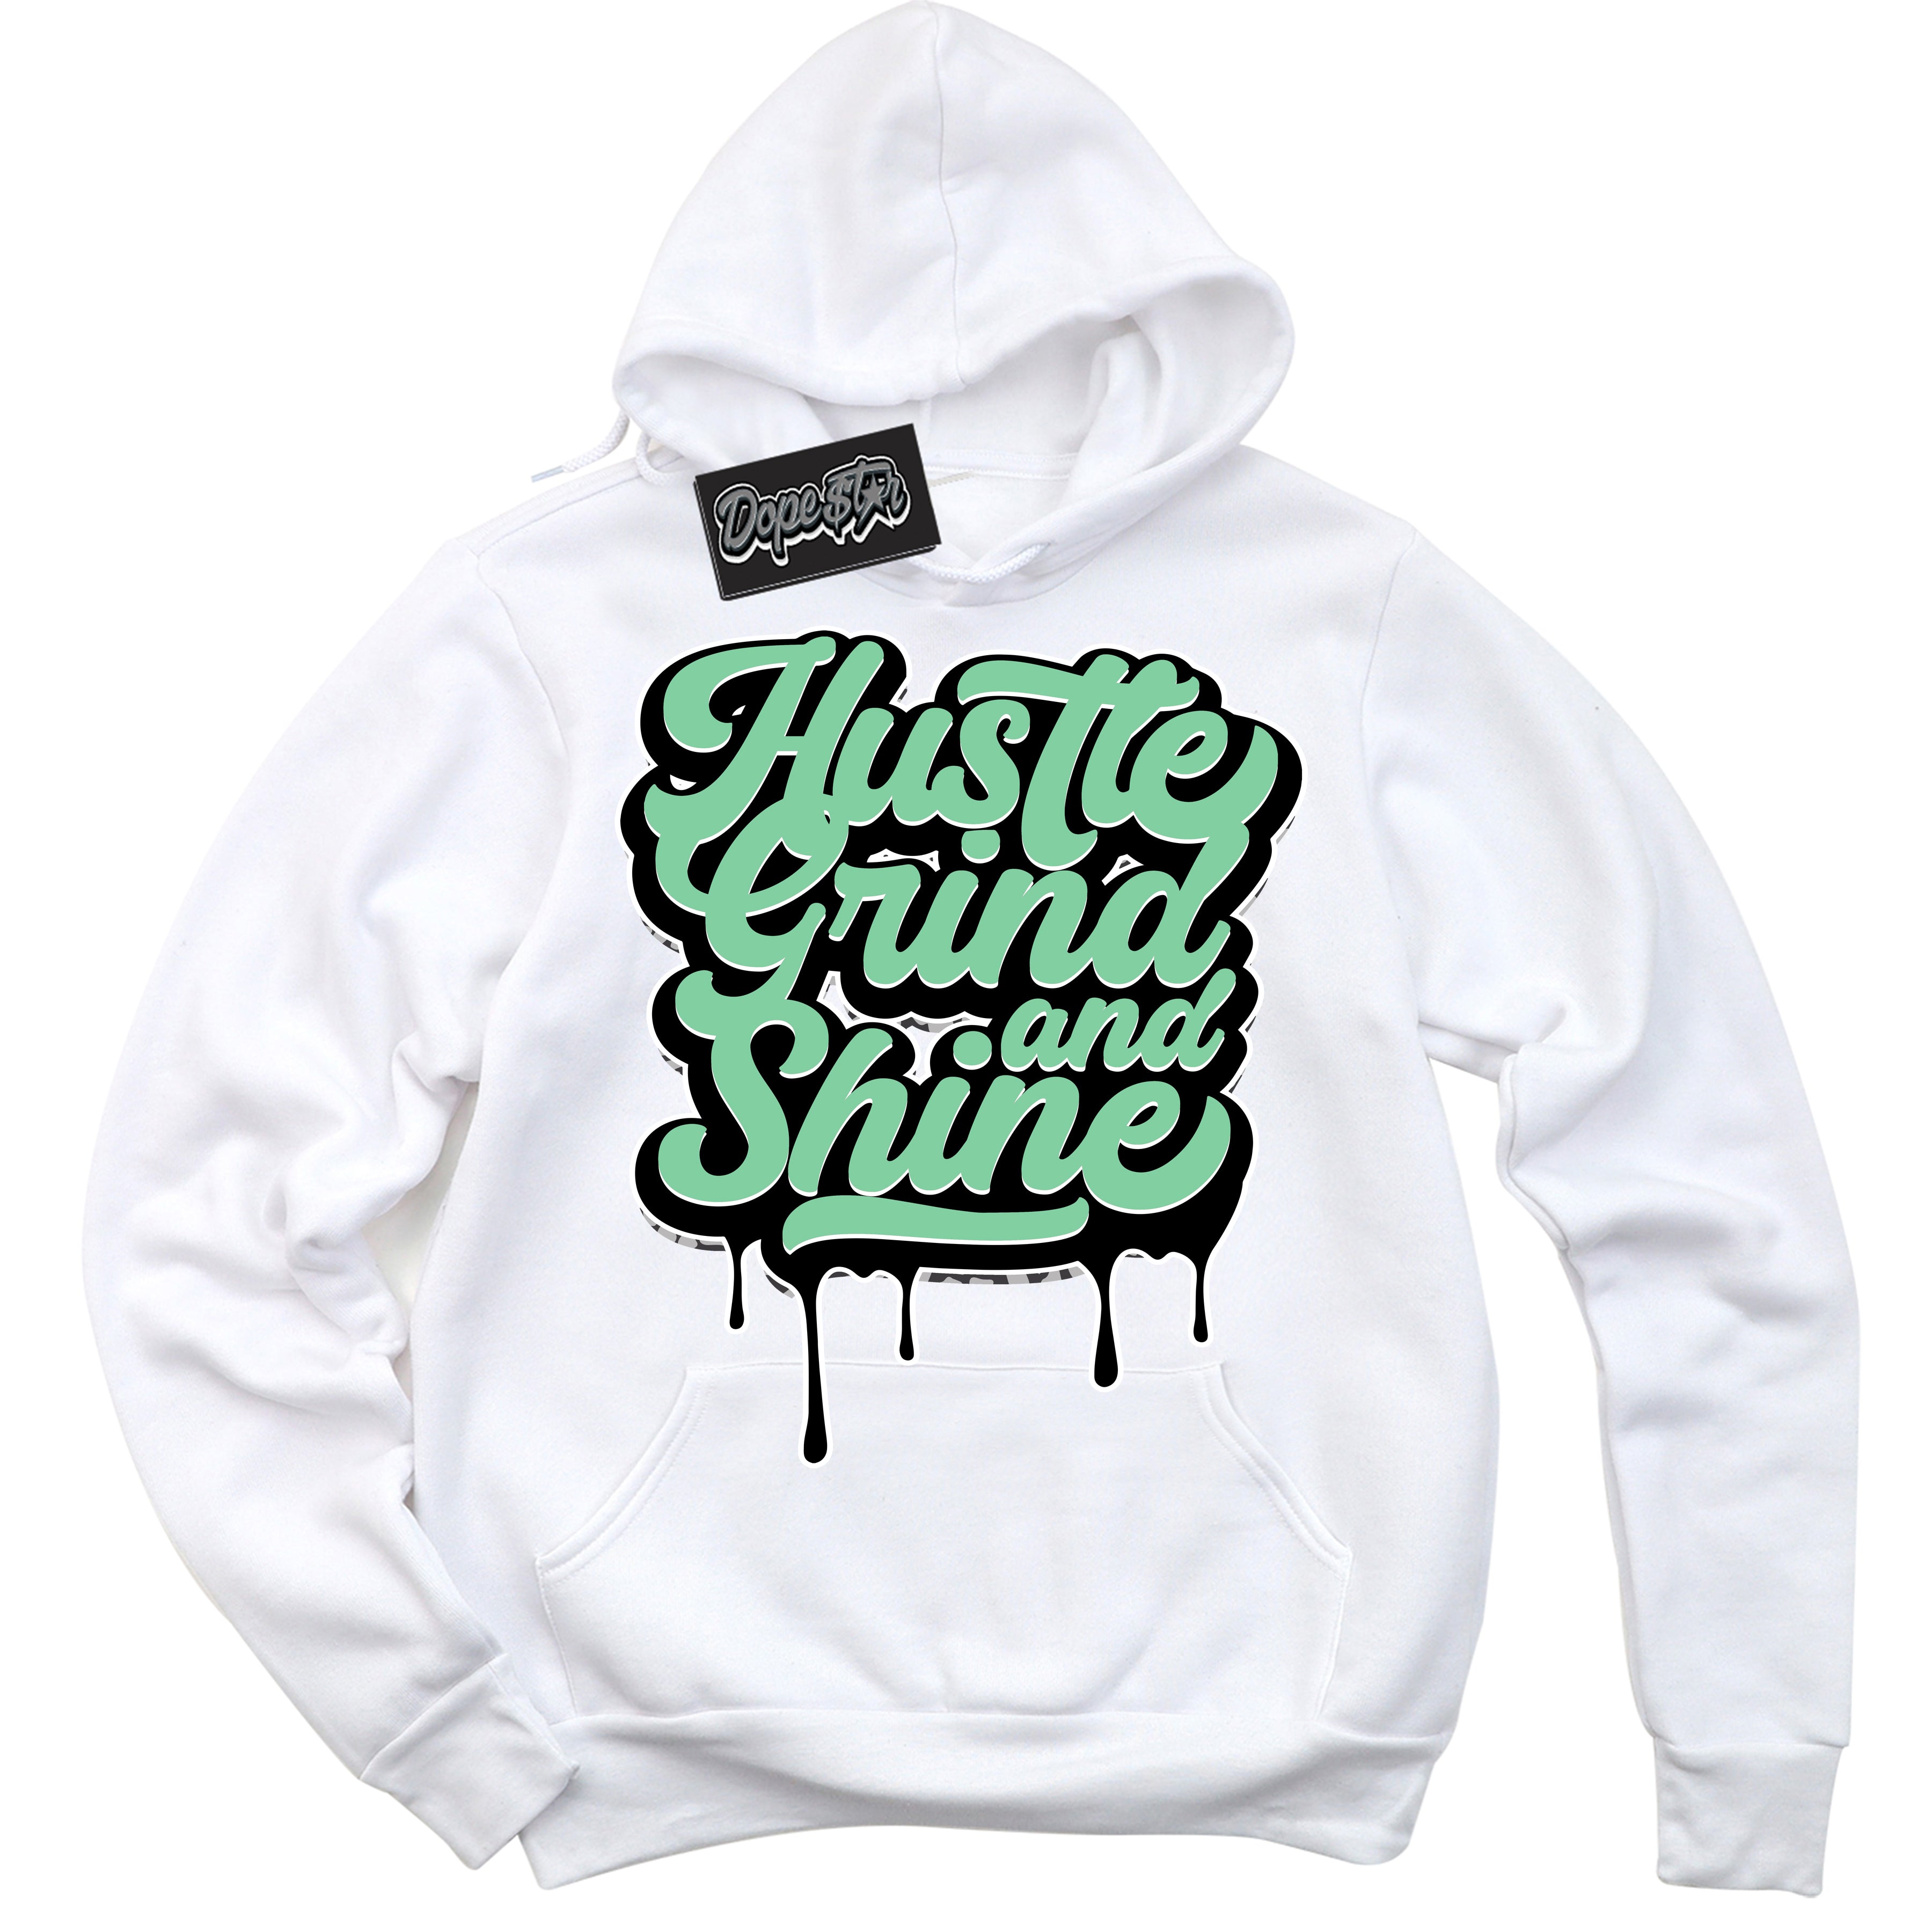 Cool White Graphic DopeStar Hoodie with “ Hustle Grind And Shine “ print, that perfectly matches Green Glow 3s sneakers